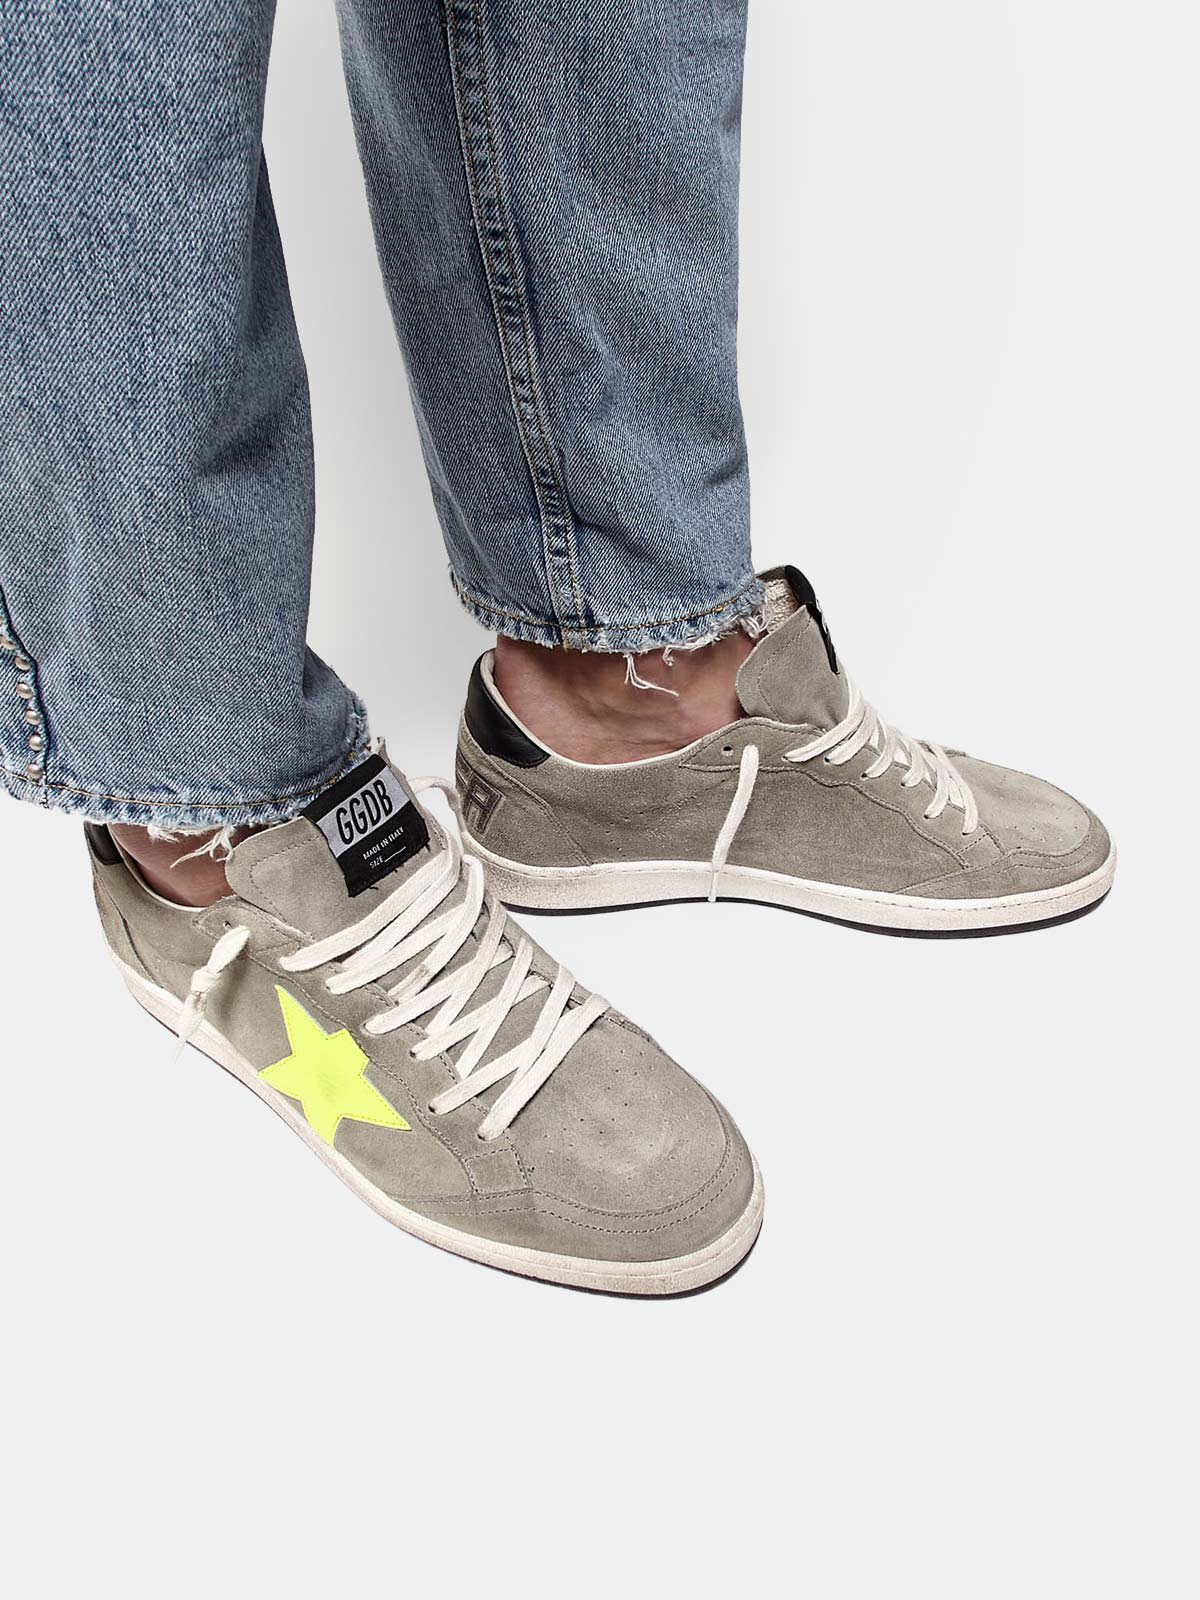 Ball Star sneakers in grey suede with dayglow star